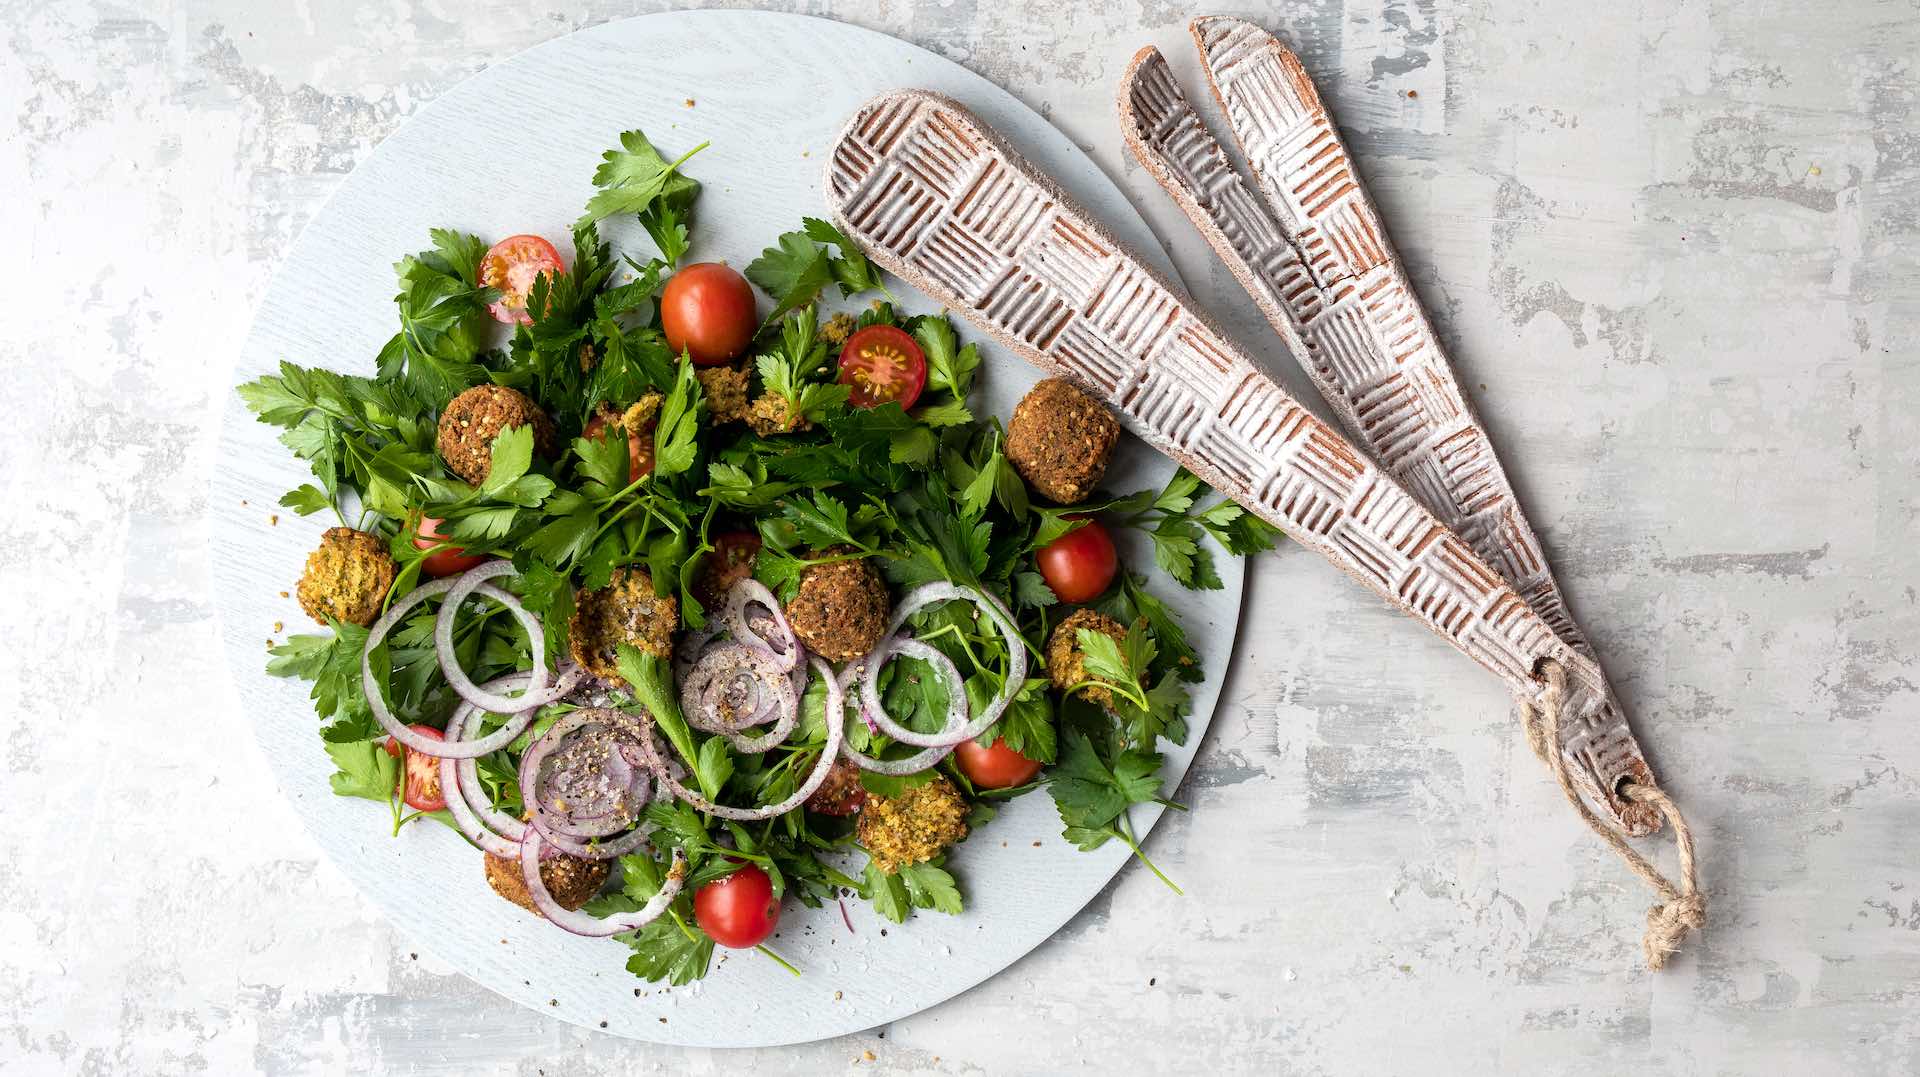 Seven Office Lunch Hacks for When You Can't Eat Any More Sad Desk Salads